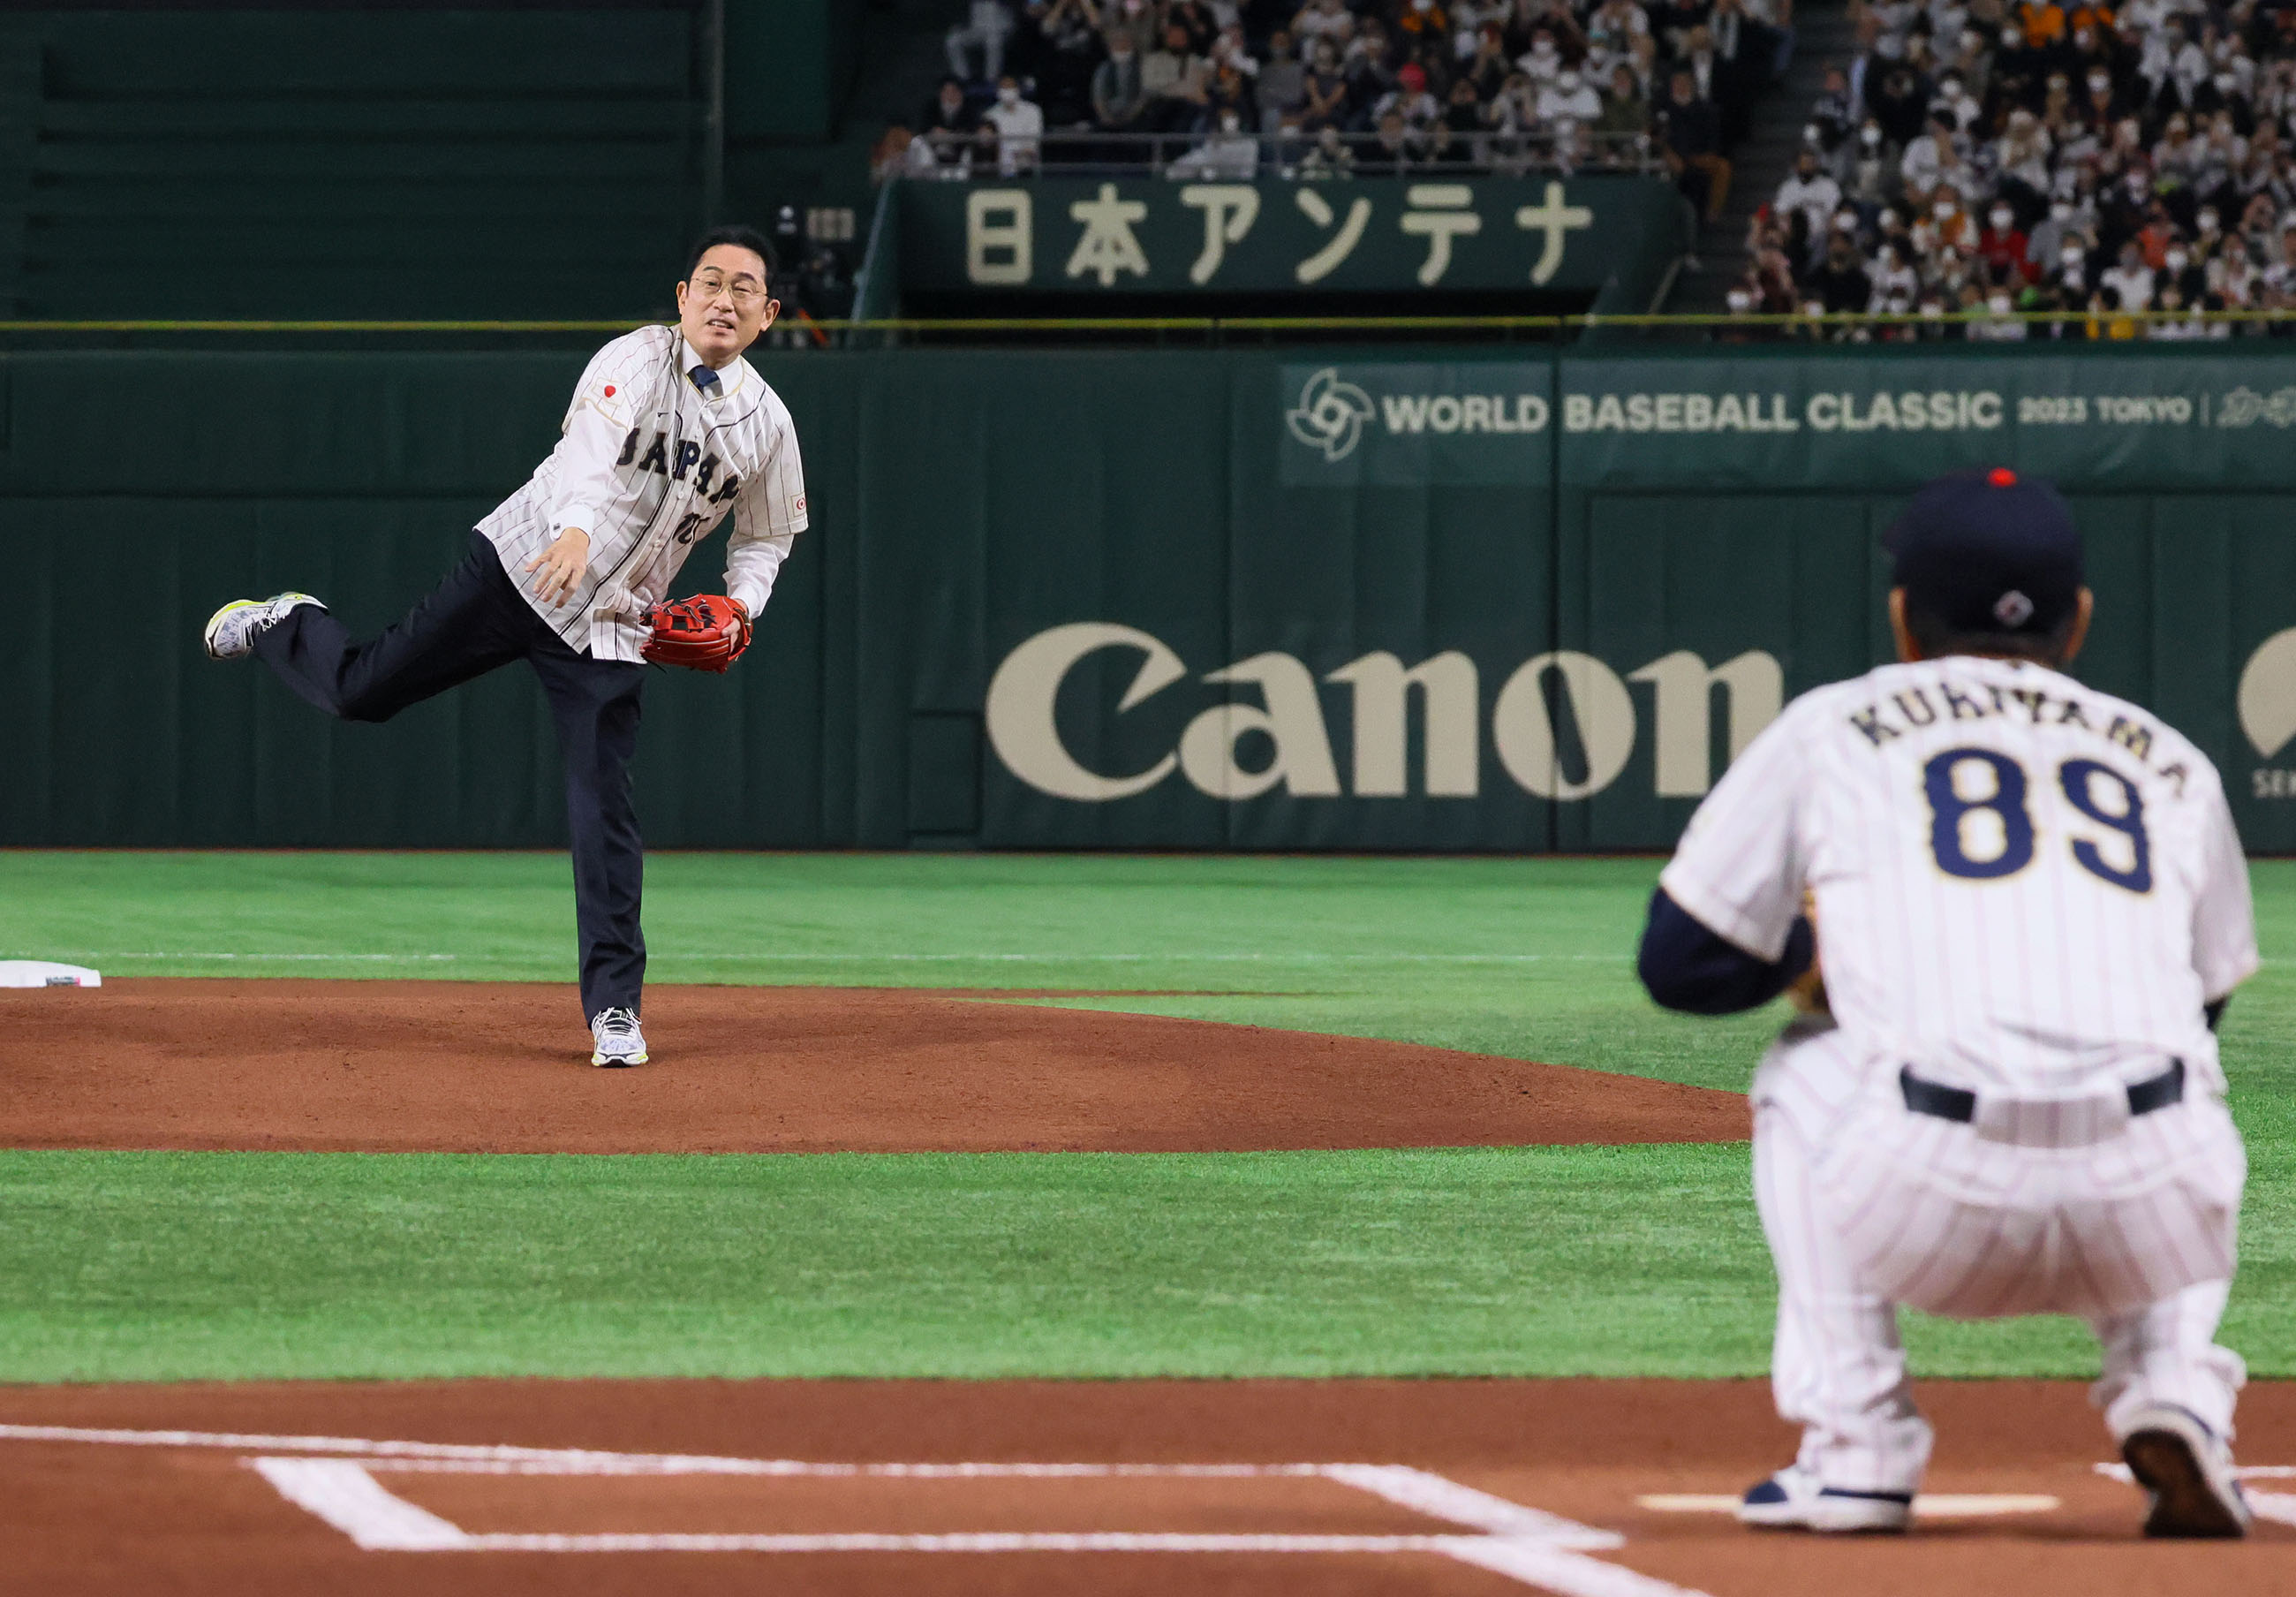 Prime Minister Kishida throwing out the ceremonial first pitch (4)